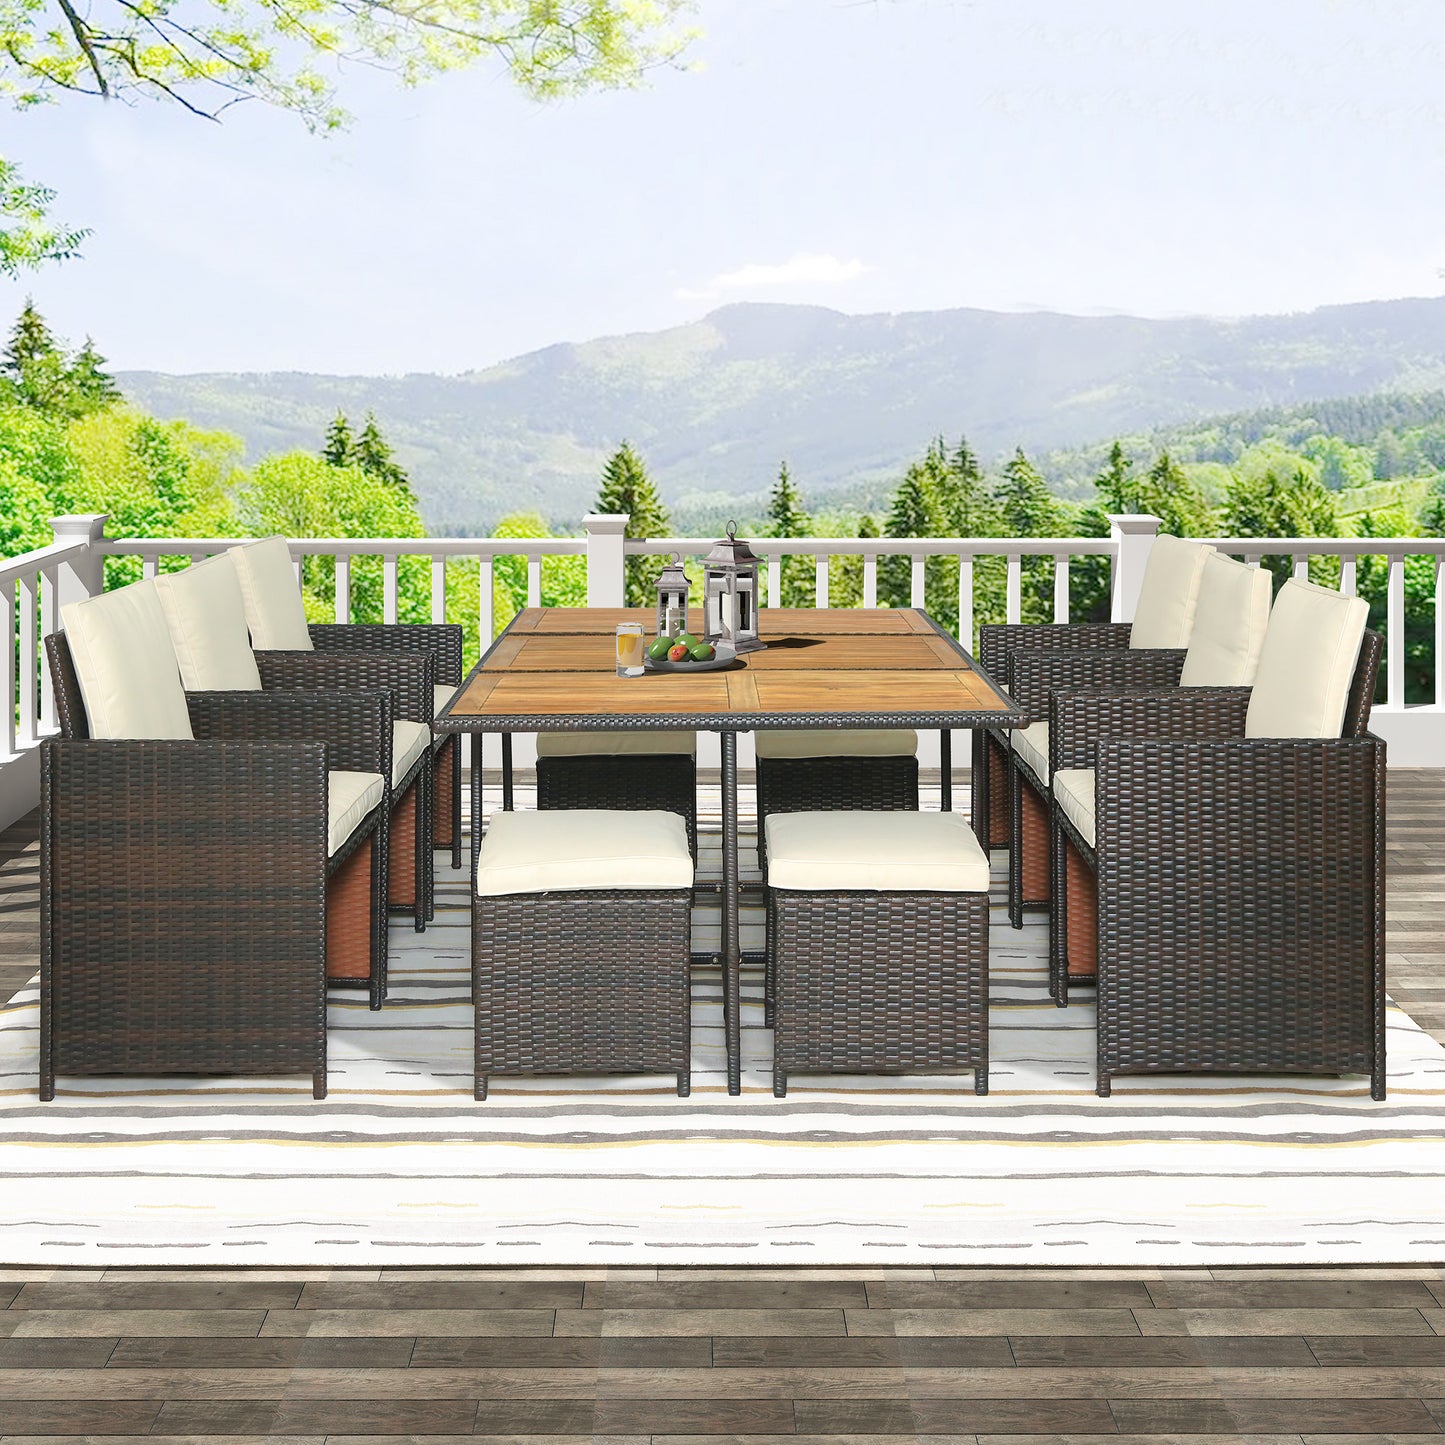 11-Piece Patio All-Weather P Dining Table Set Tabletop